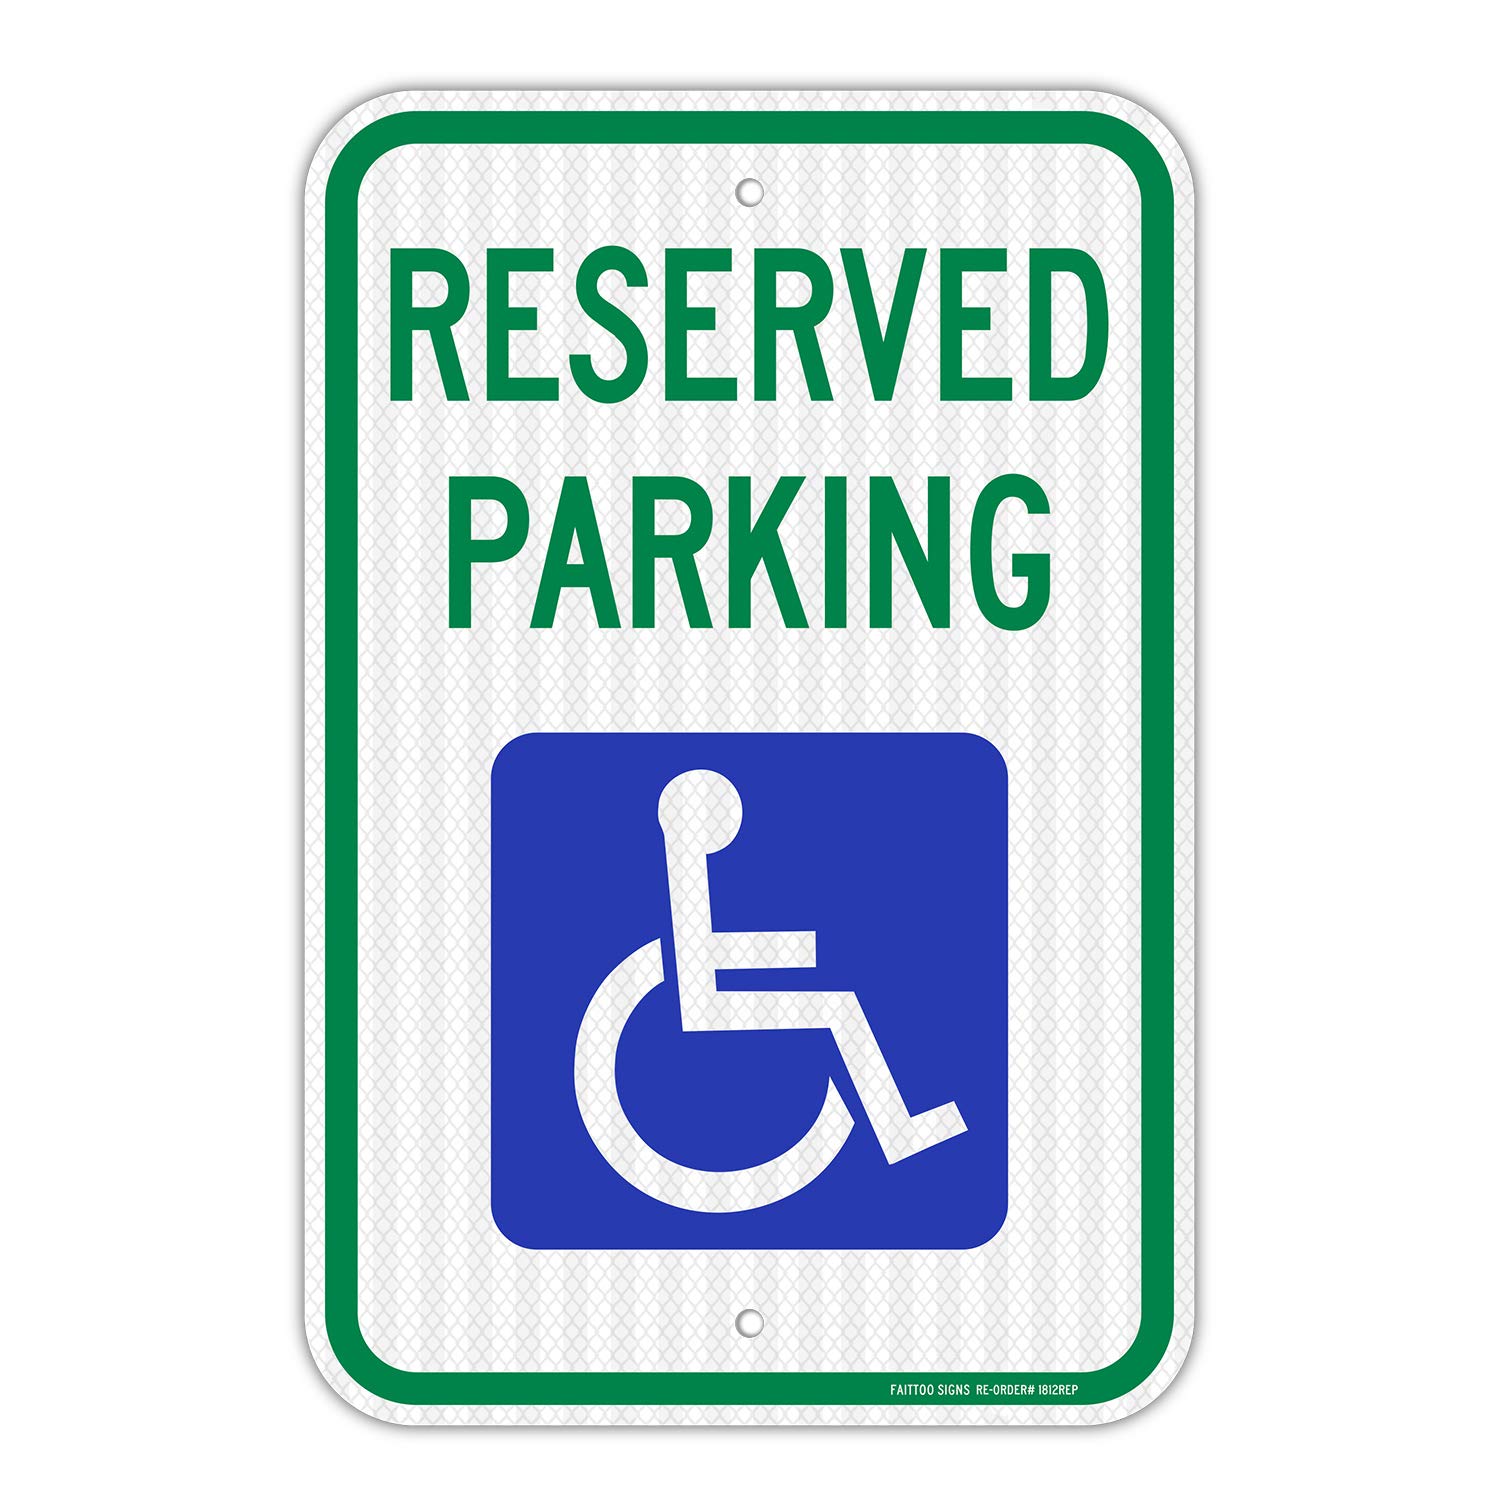 Reserved Parking Sign, Handicap Parking with Picture of Wheelchair Sign,18 x 12 Inches Engineer Grade Reflective Sheeting Rust Free Aluminum, Weather Resistant, Waterproof, Durable Ink